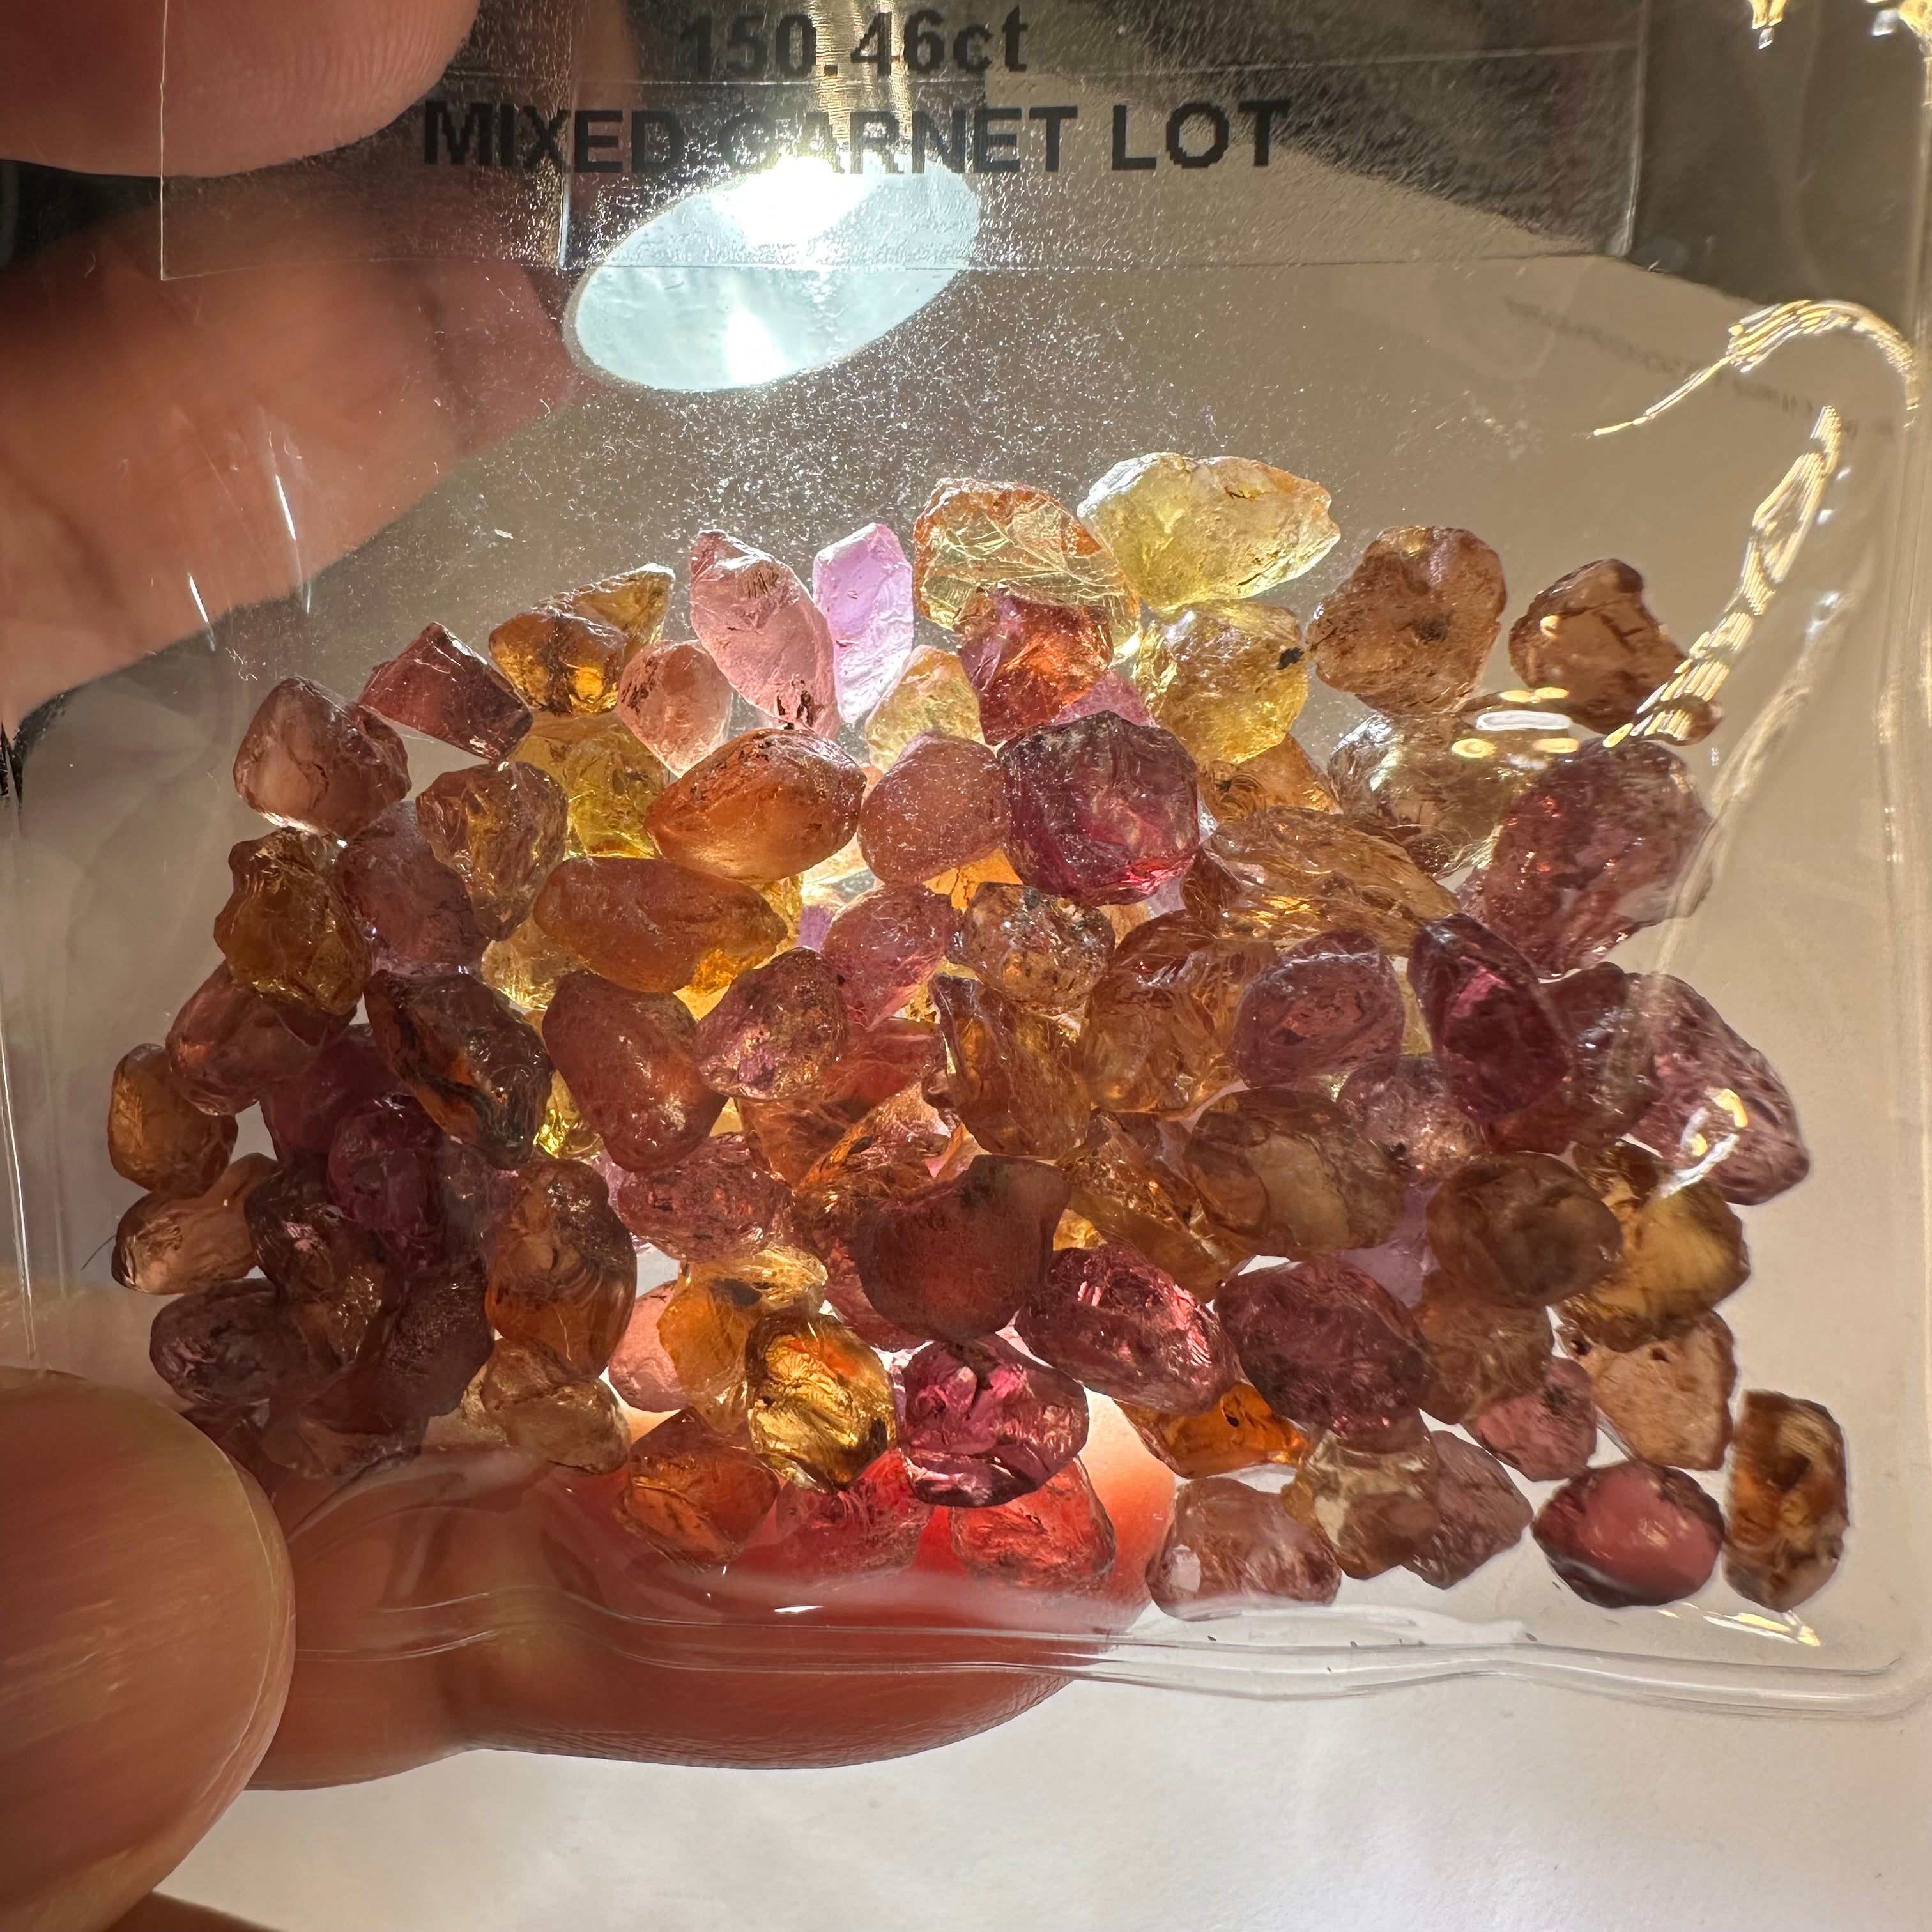 150.46ct Mixed Garnet Lot, Tanzania, Untreated Unheated, slightly included to included